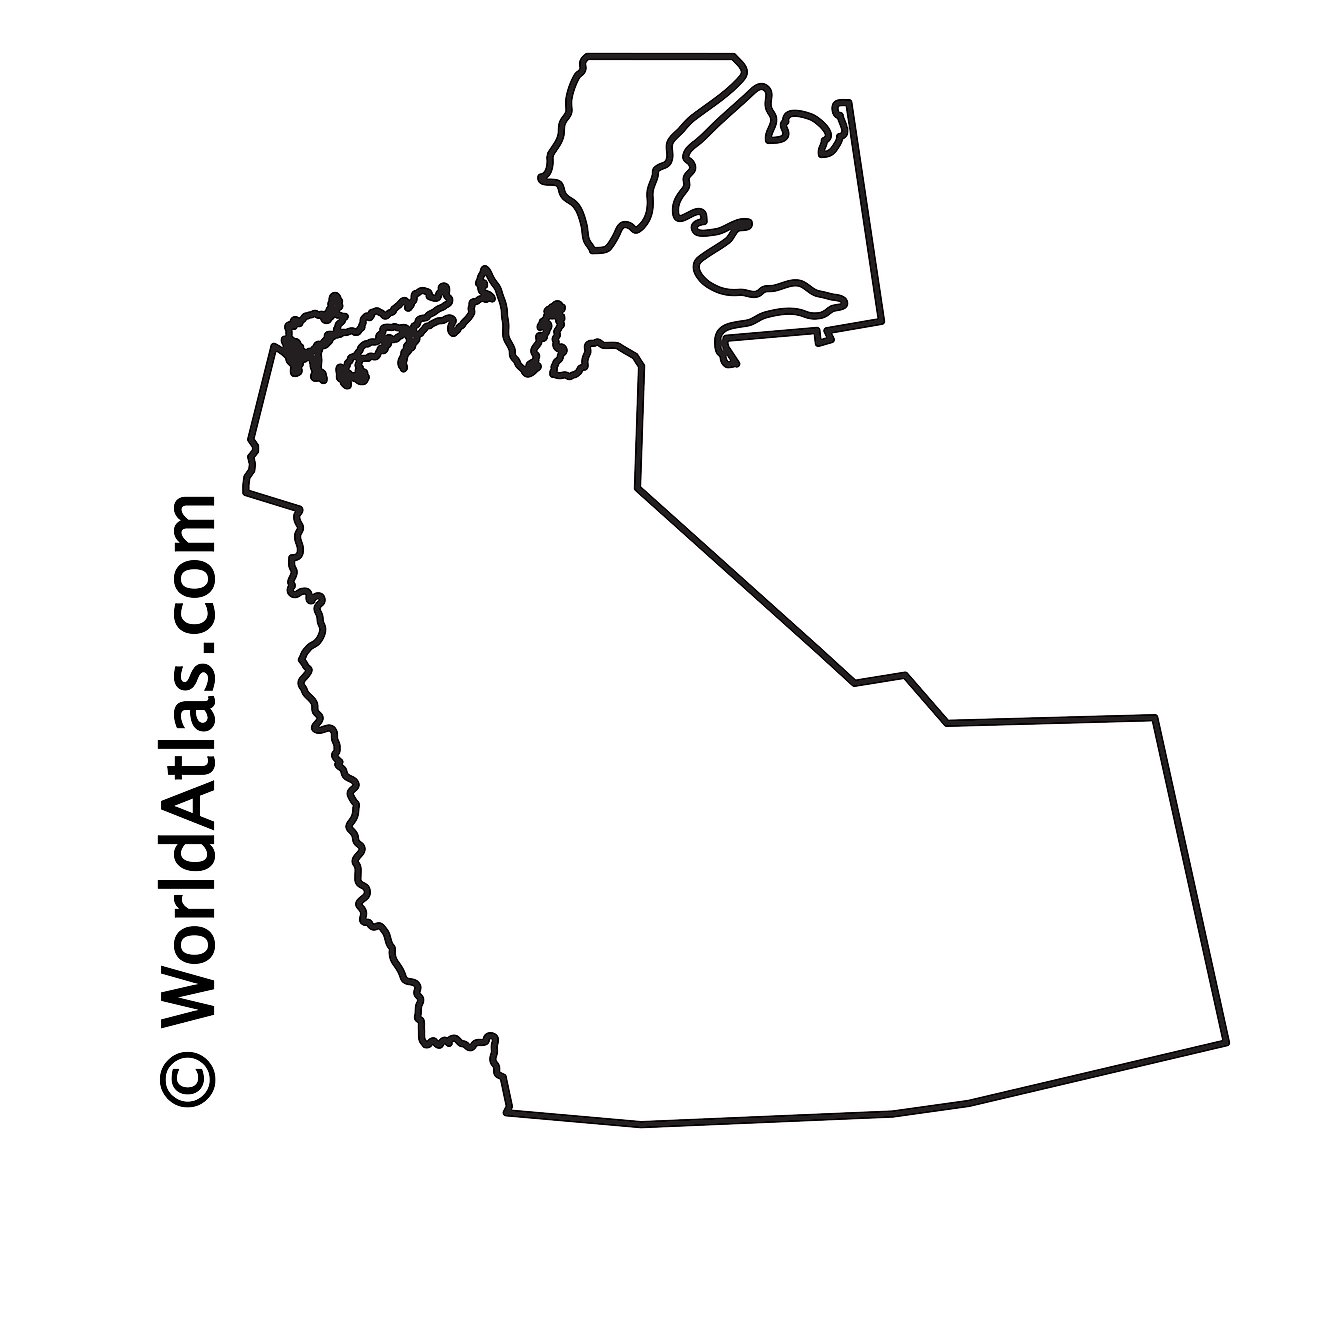 Blank Outline Map of Northwest Territories